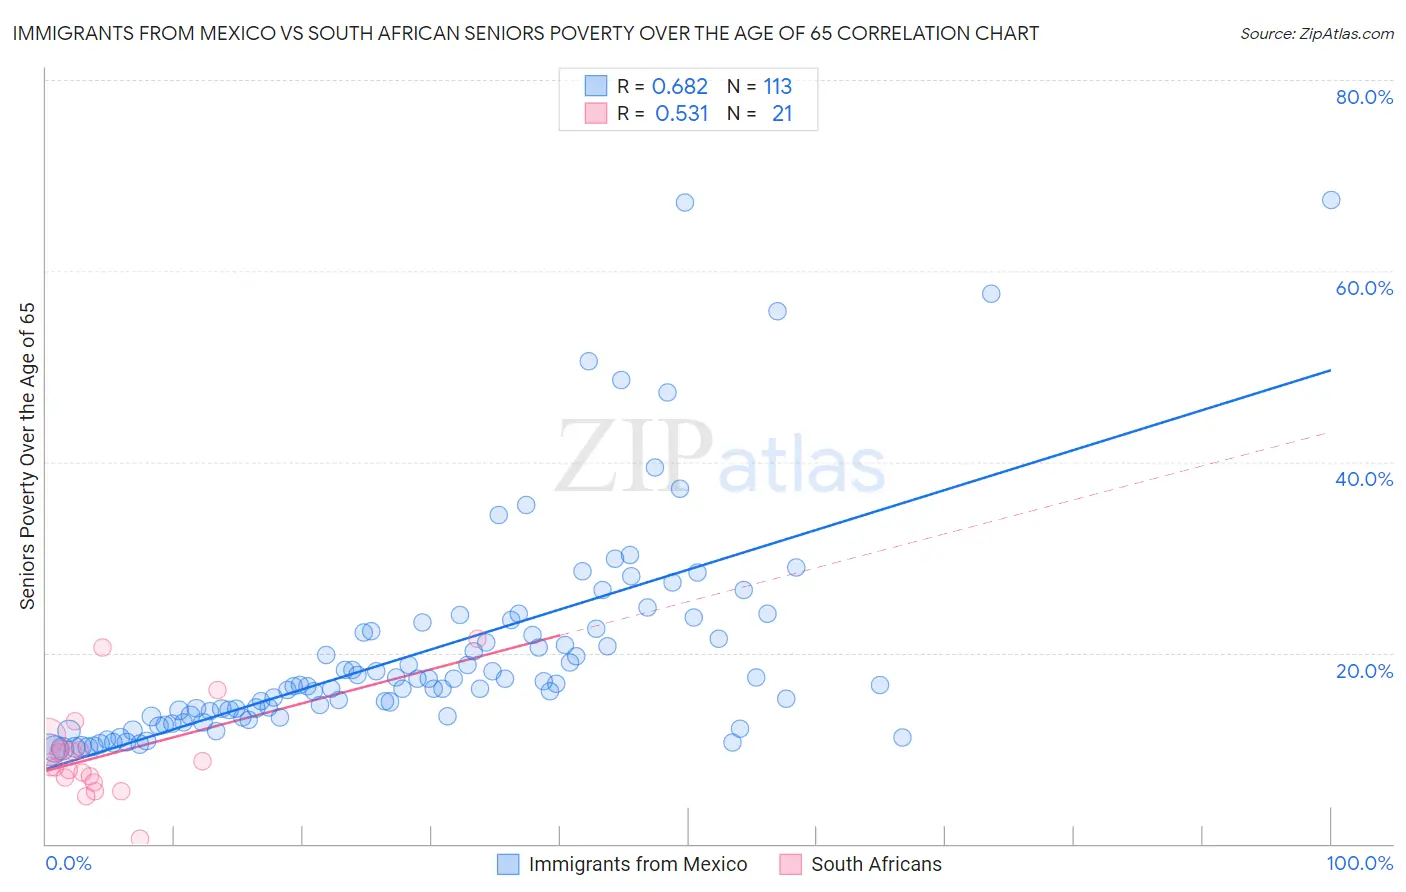 Immigrants from Mexico vs South African Seniors Poverty Over the Age of 65